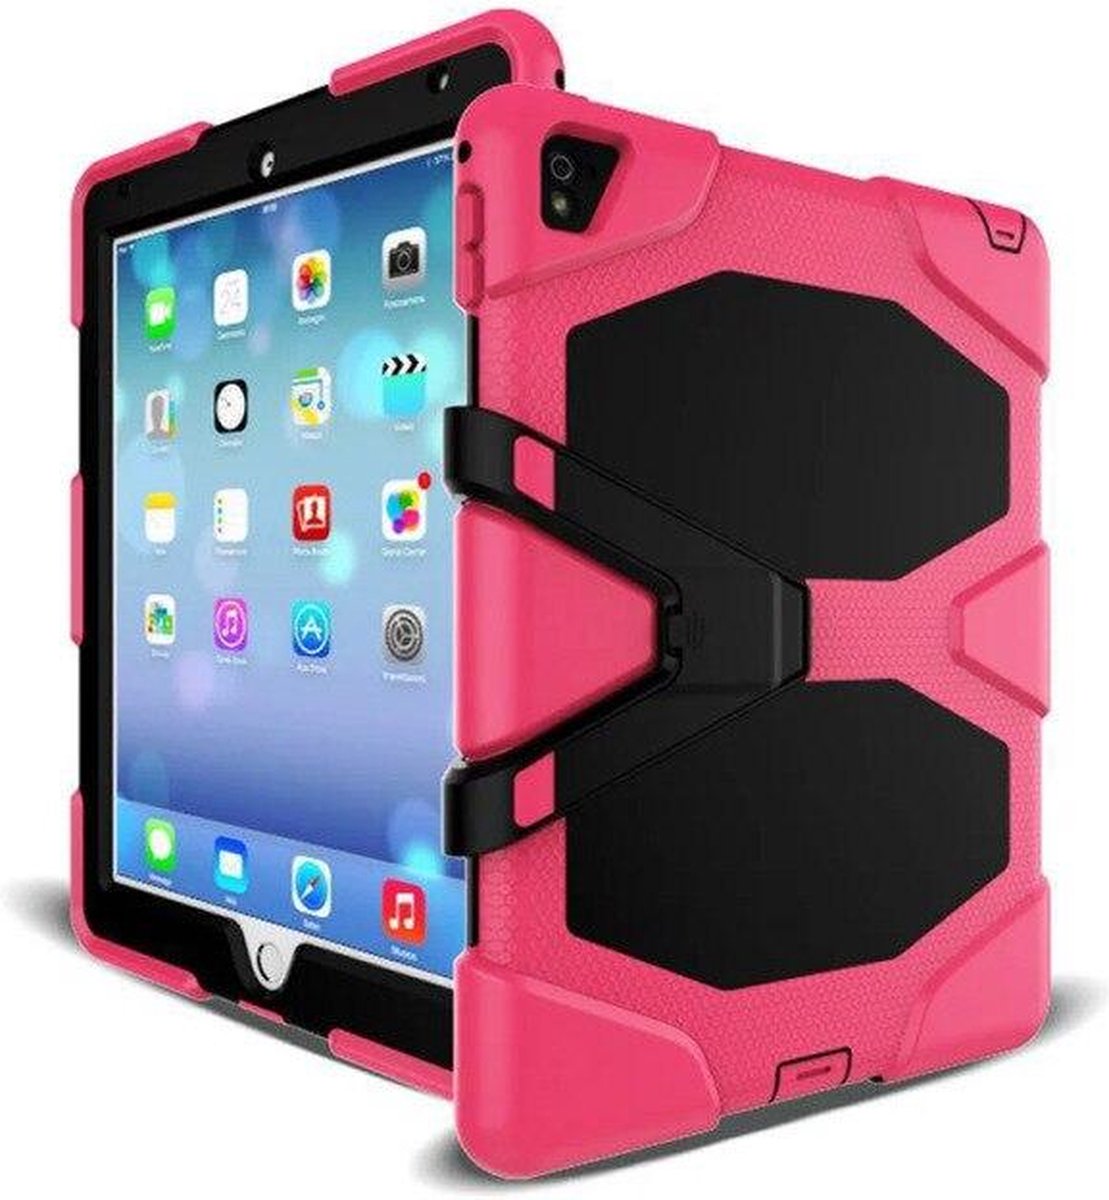 Extreme Robuuste Armor Case Hoesje Tablethoes Geschikt voor: Apple iPad Air 1 (2013) - 9.7 inch - A1474 - A1475 - 9.7 inch - Blauw